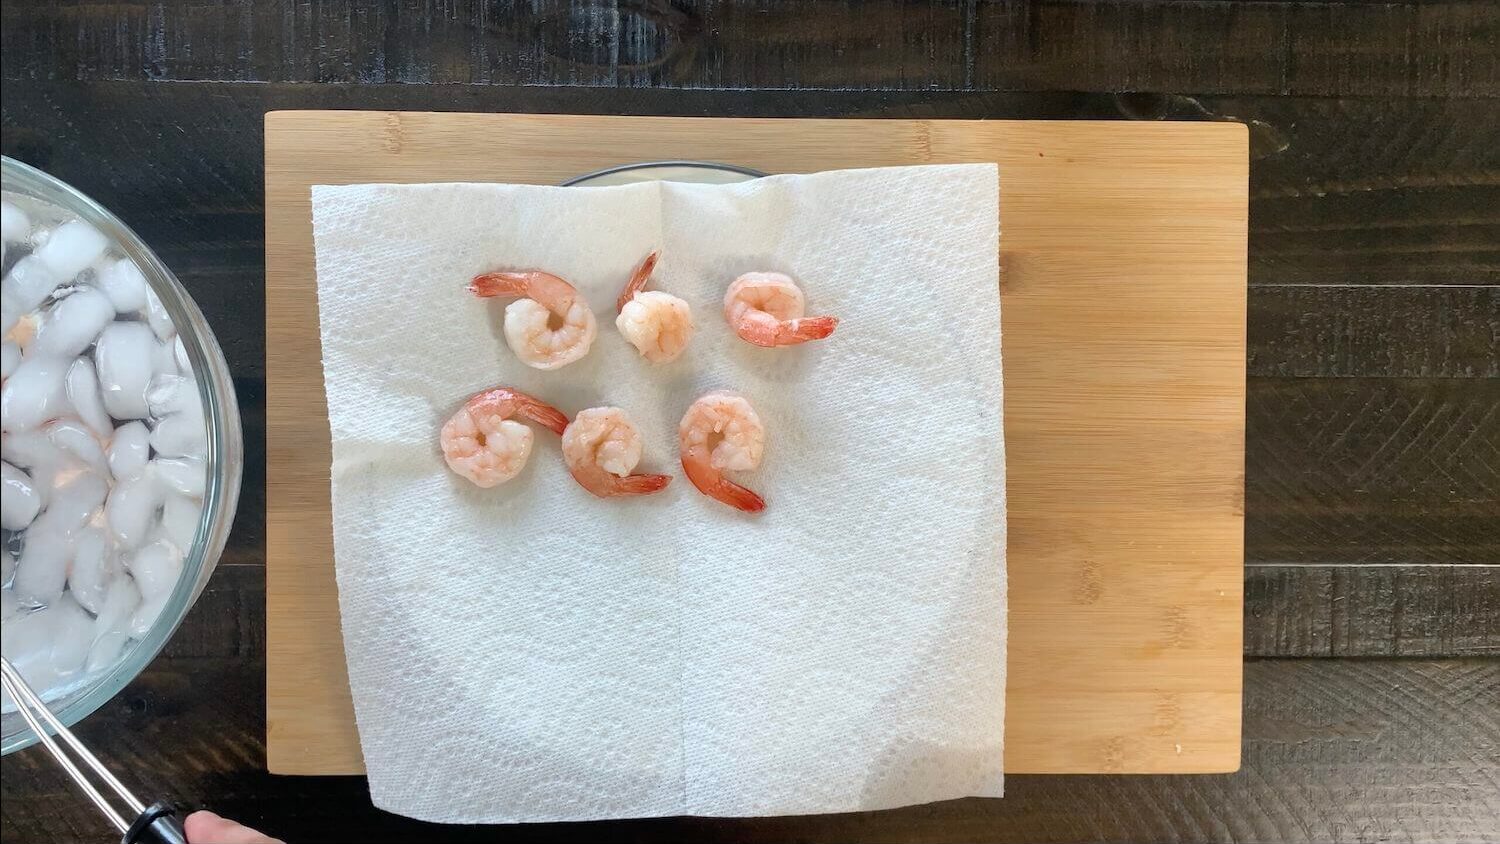 Remove poached shrimp from water and add to paper towel.